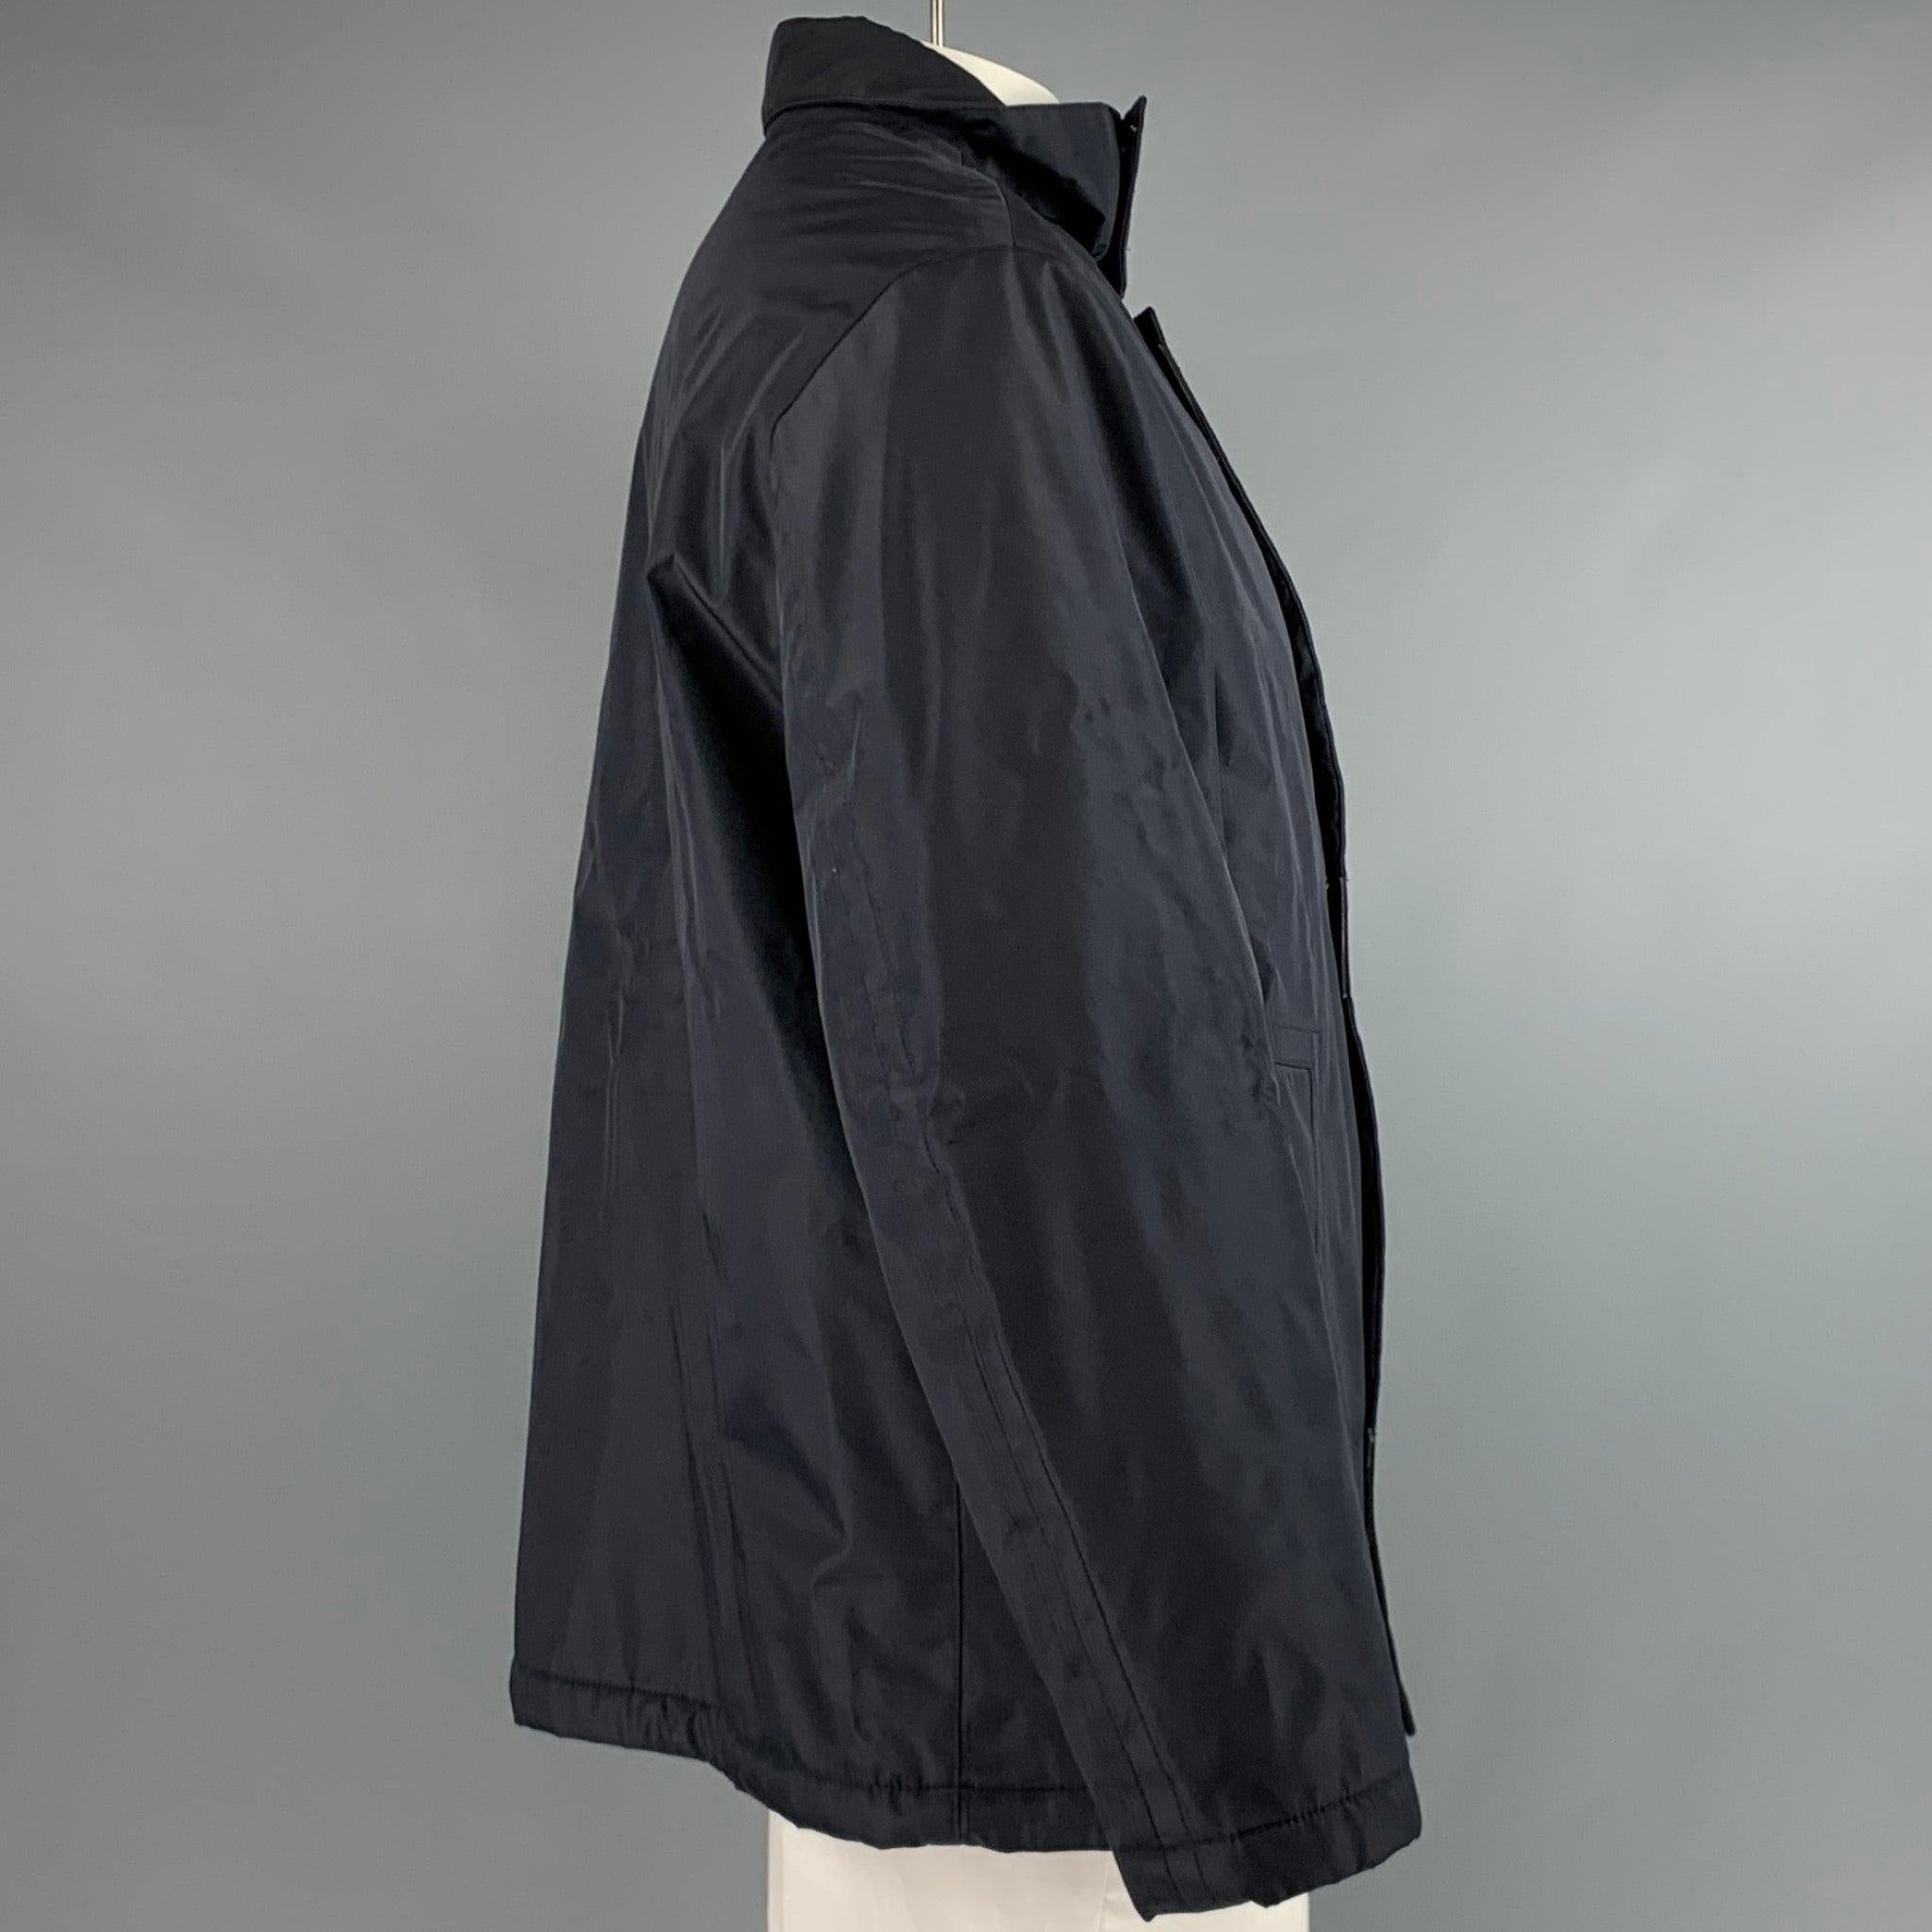 PAL ZILERI jacket in a navy polyester blend fabric featuring two exterior pockets, and a zip up style with self-fastening closure. Made in Italy.Excellent Pre-Owned Condition. 

Marked:   52 

Measurements: 
 
Shoulder: 19.5 inches Chest: 44 inches